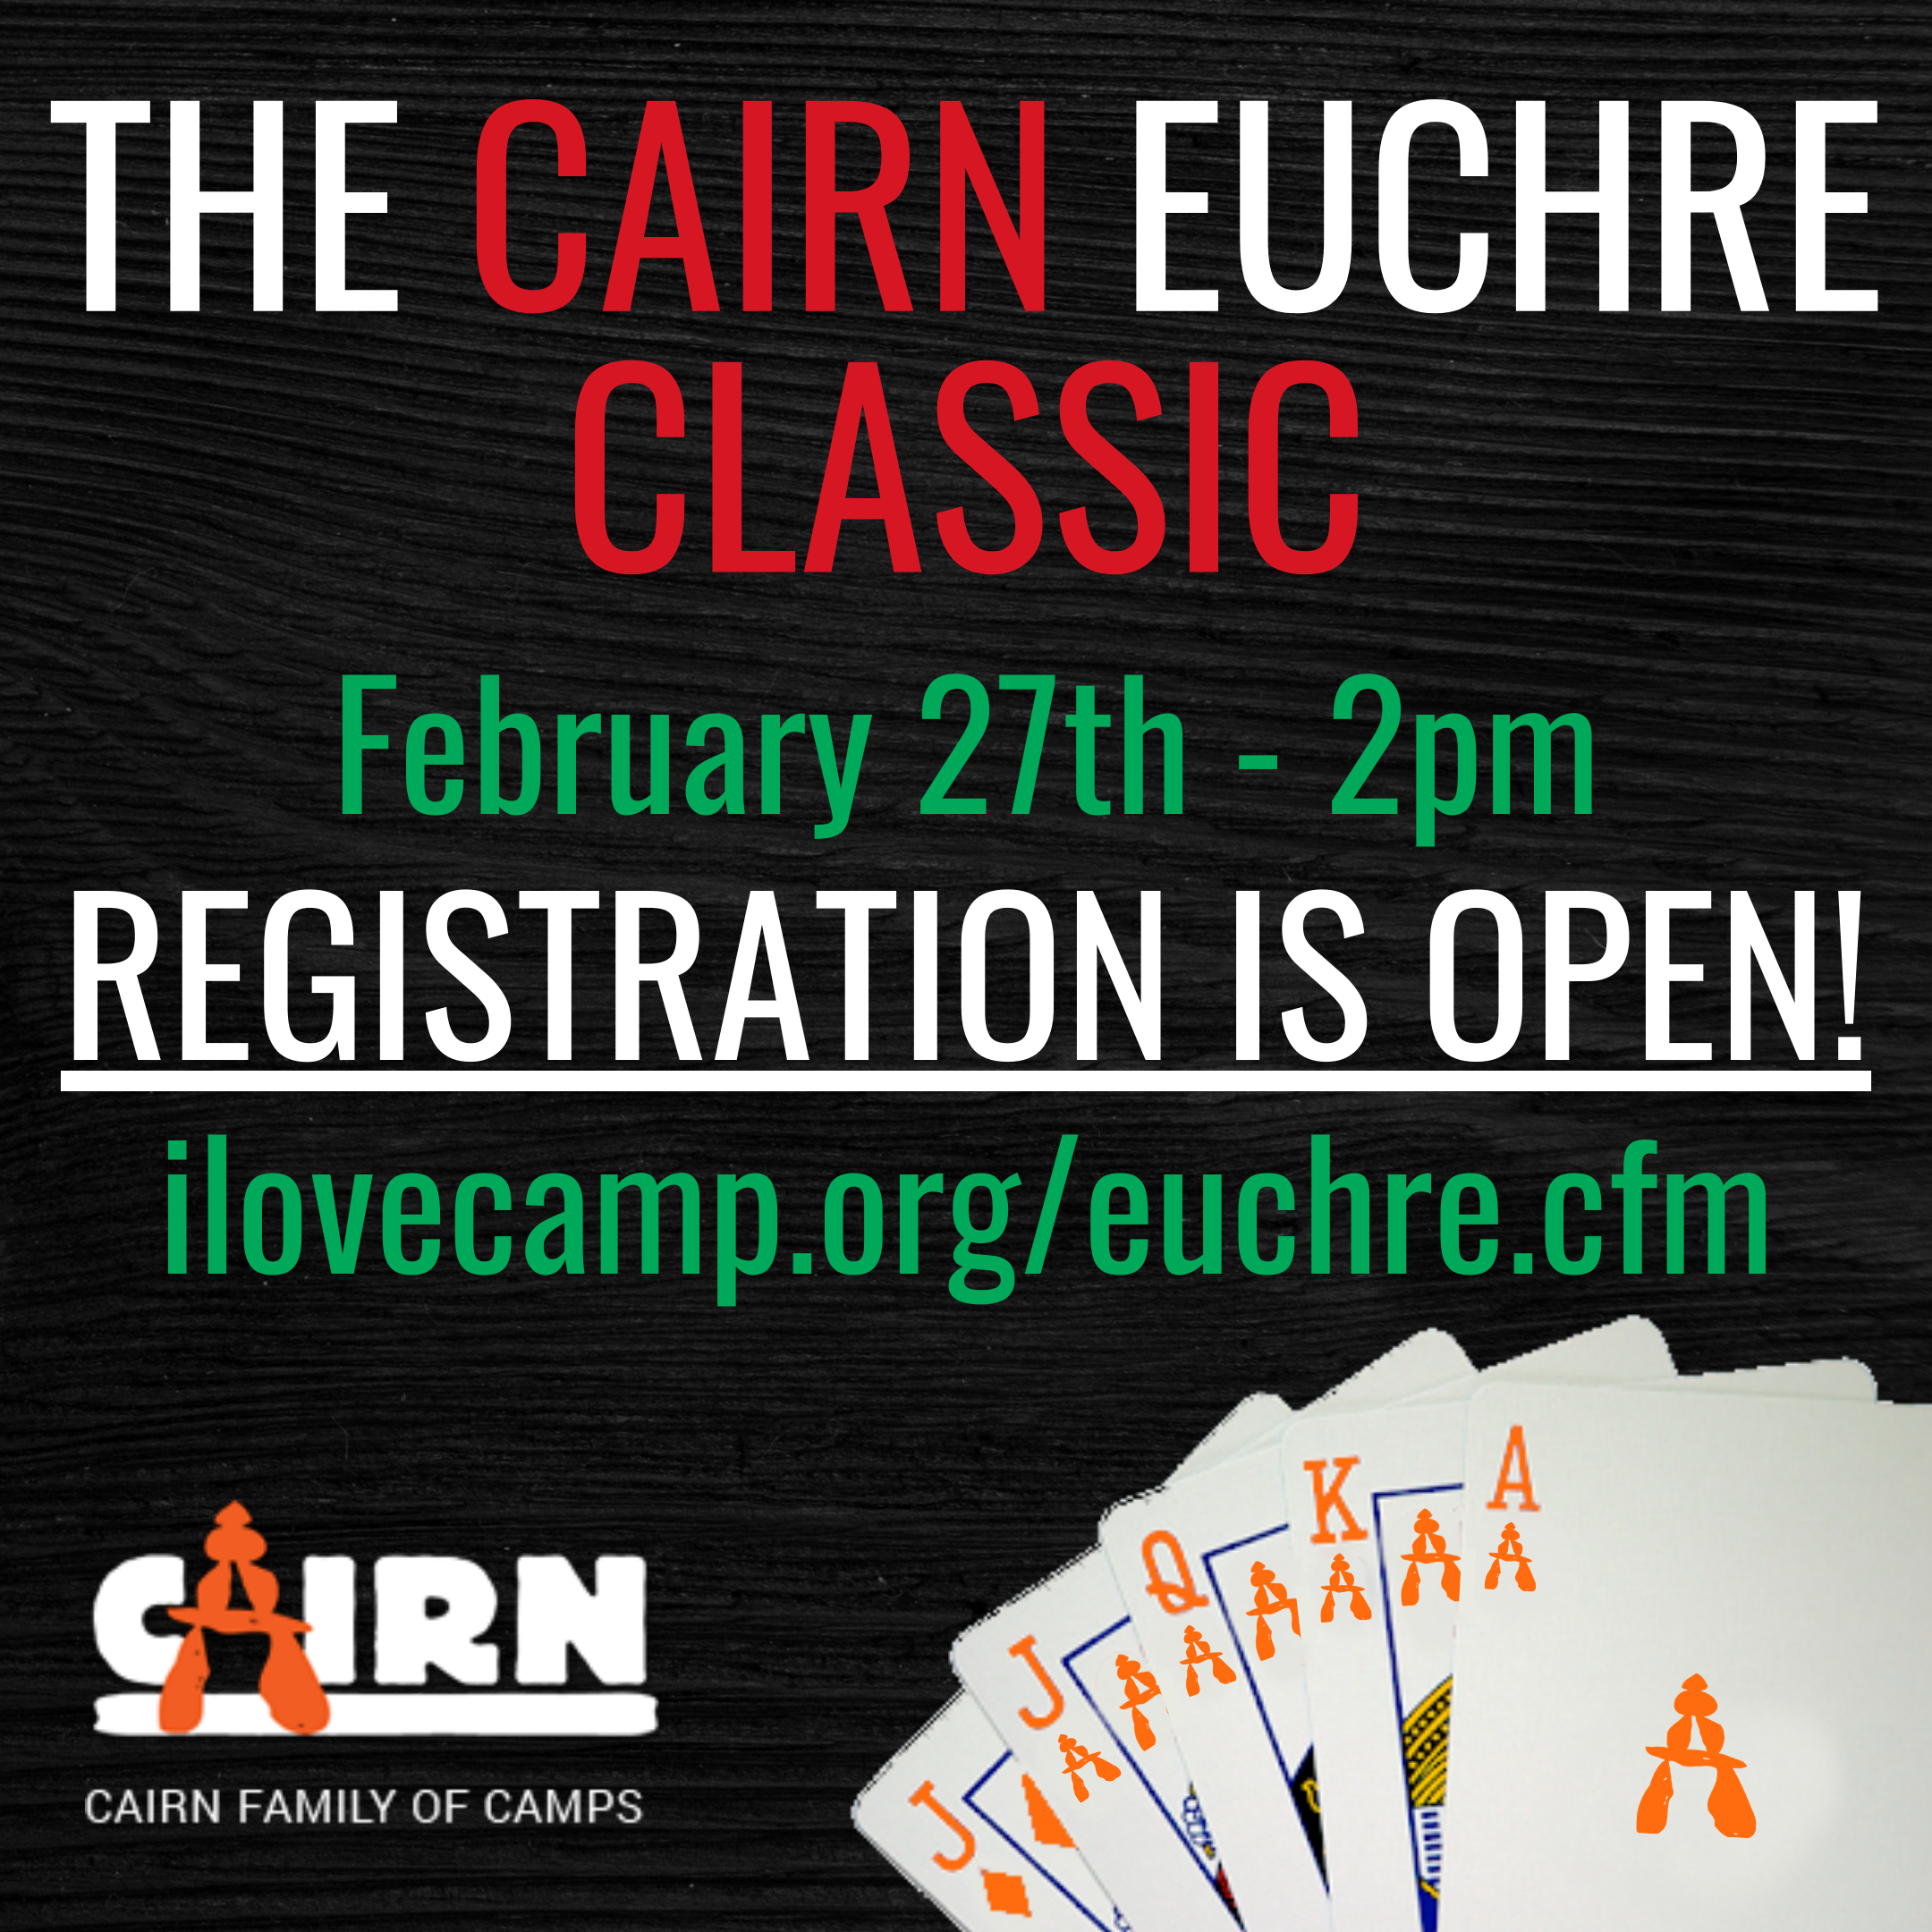 The Cairn Euchre Classic